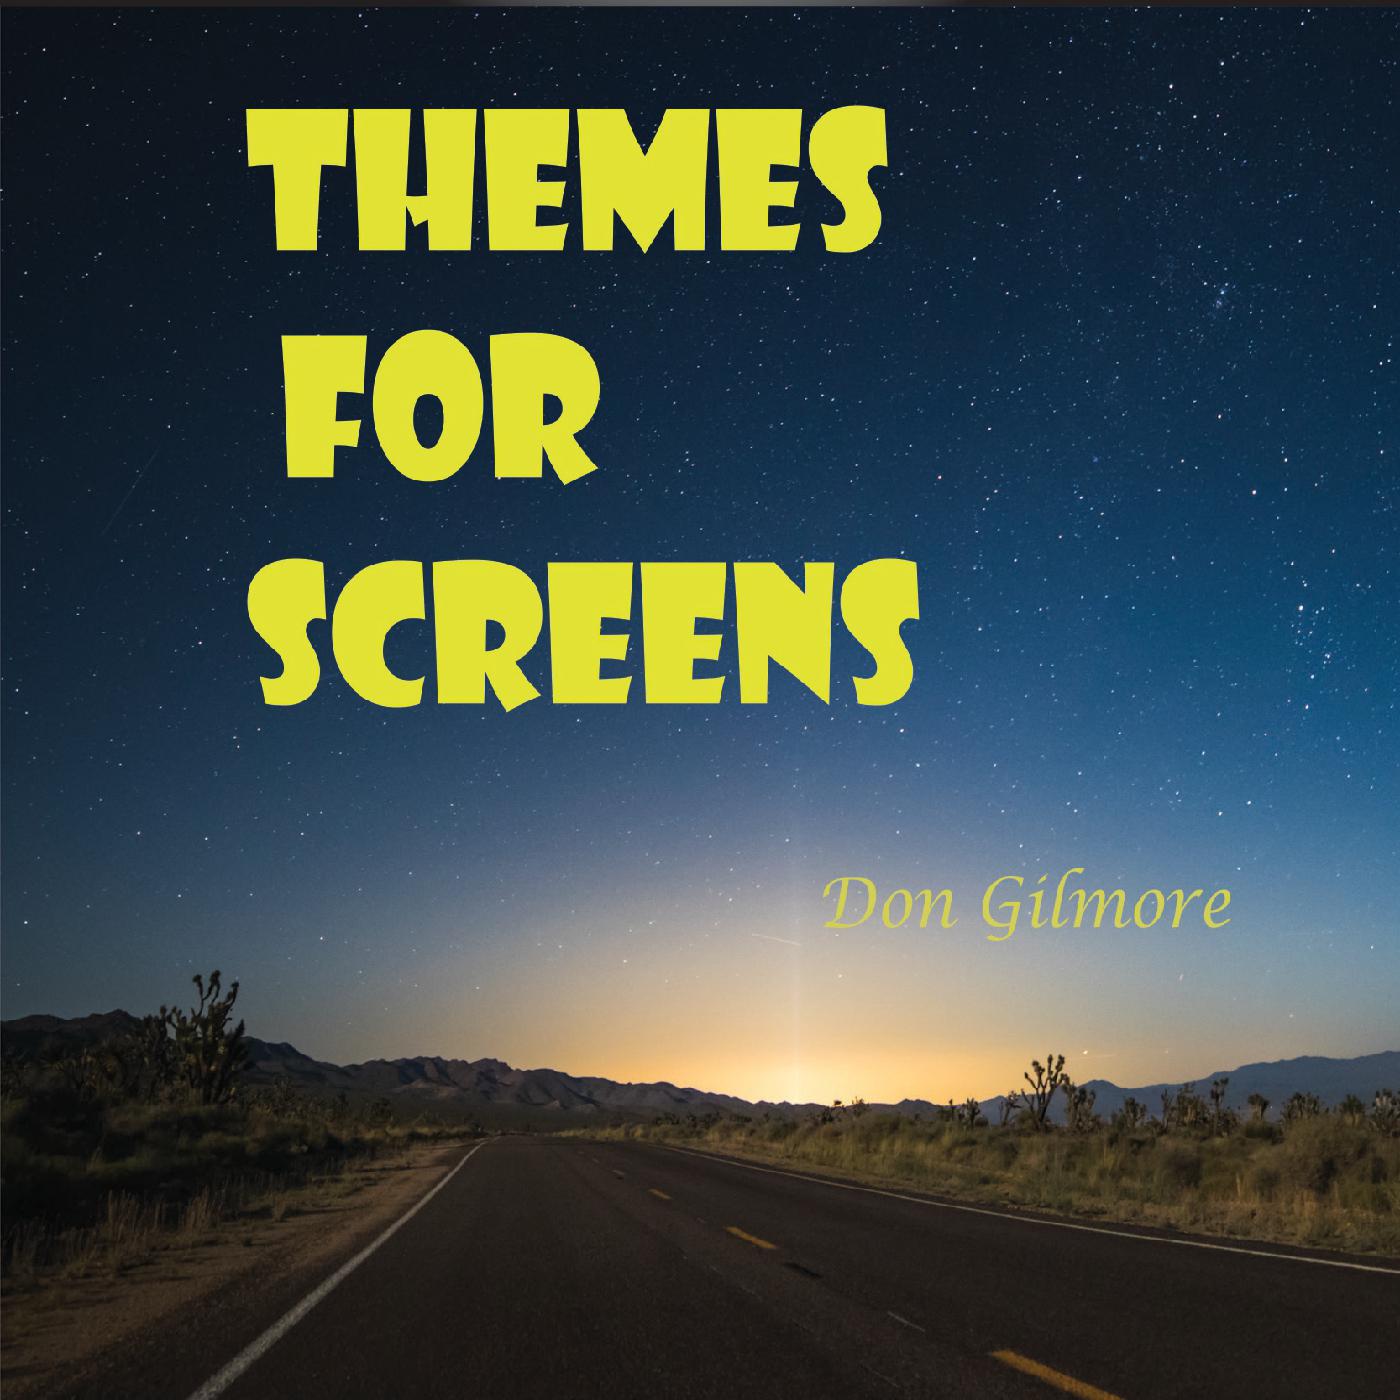 Don Gilmore - The Highlands of Home